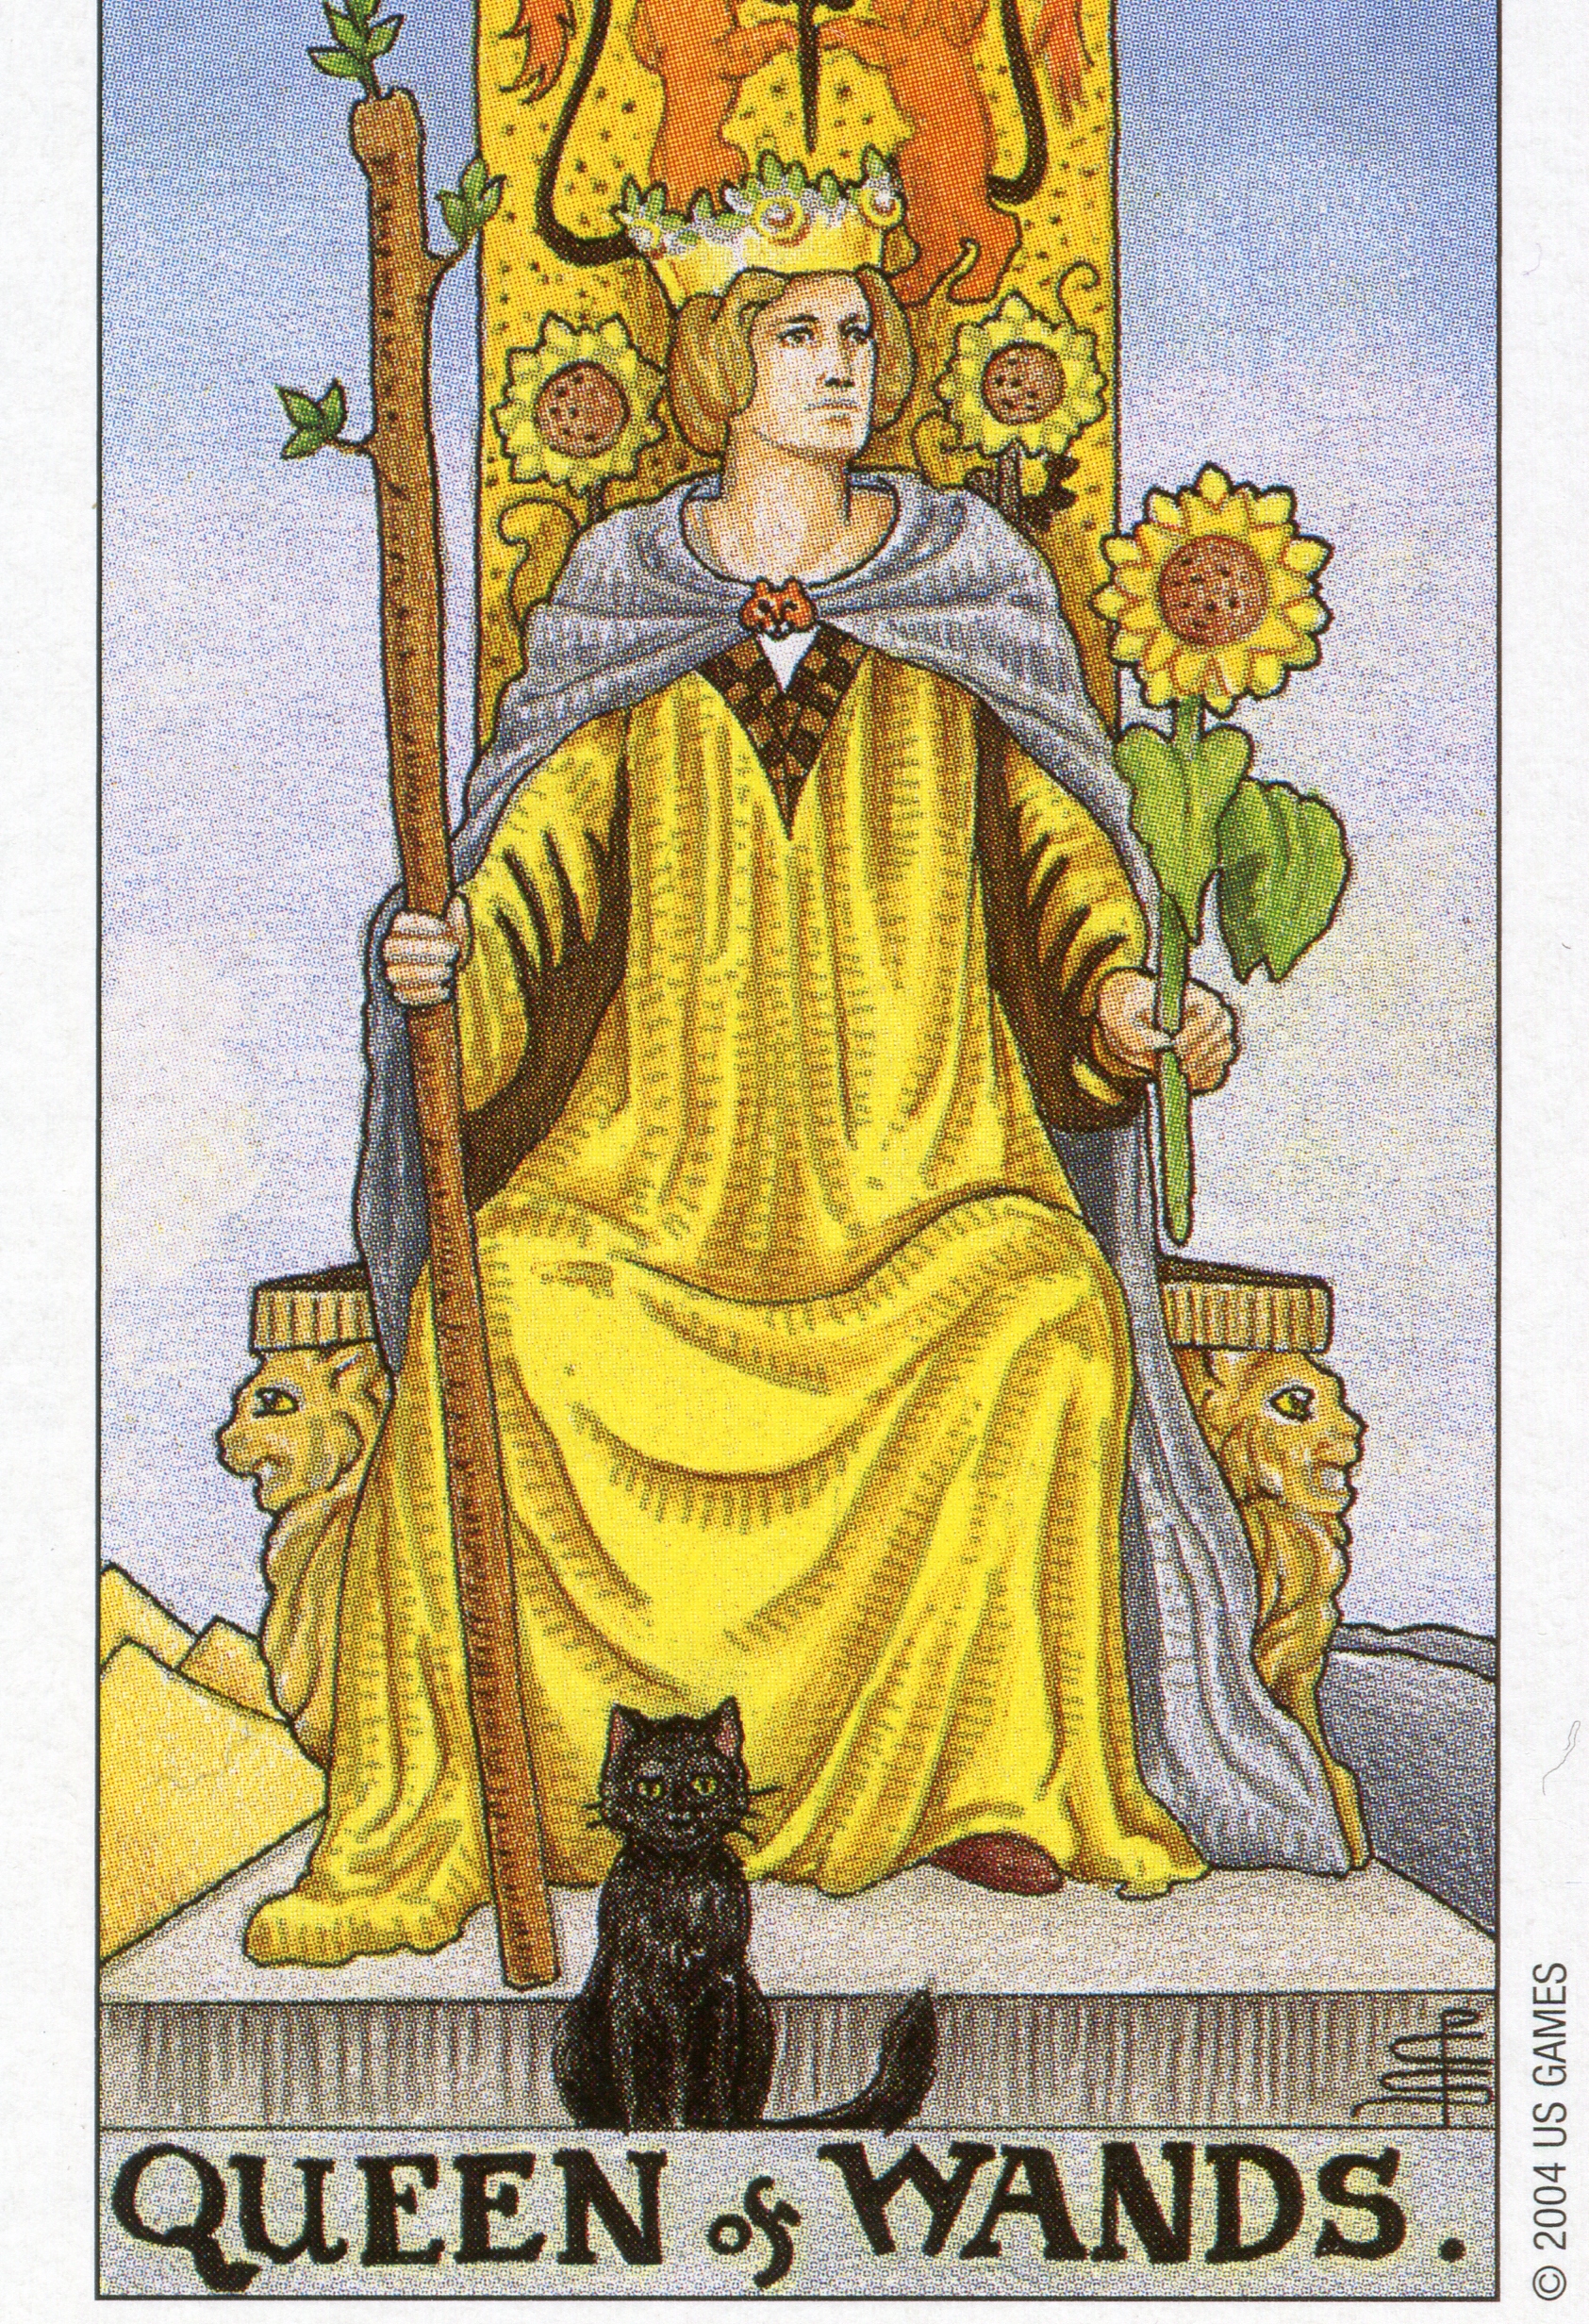 Styre Ren Blind tillid Finding Strength and Power with the Queen of Wands - Dina Berrin